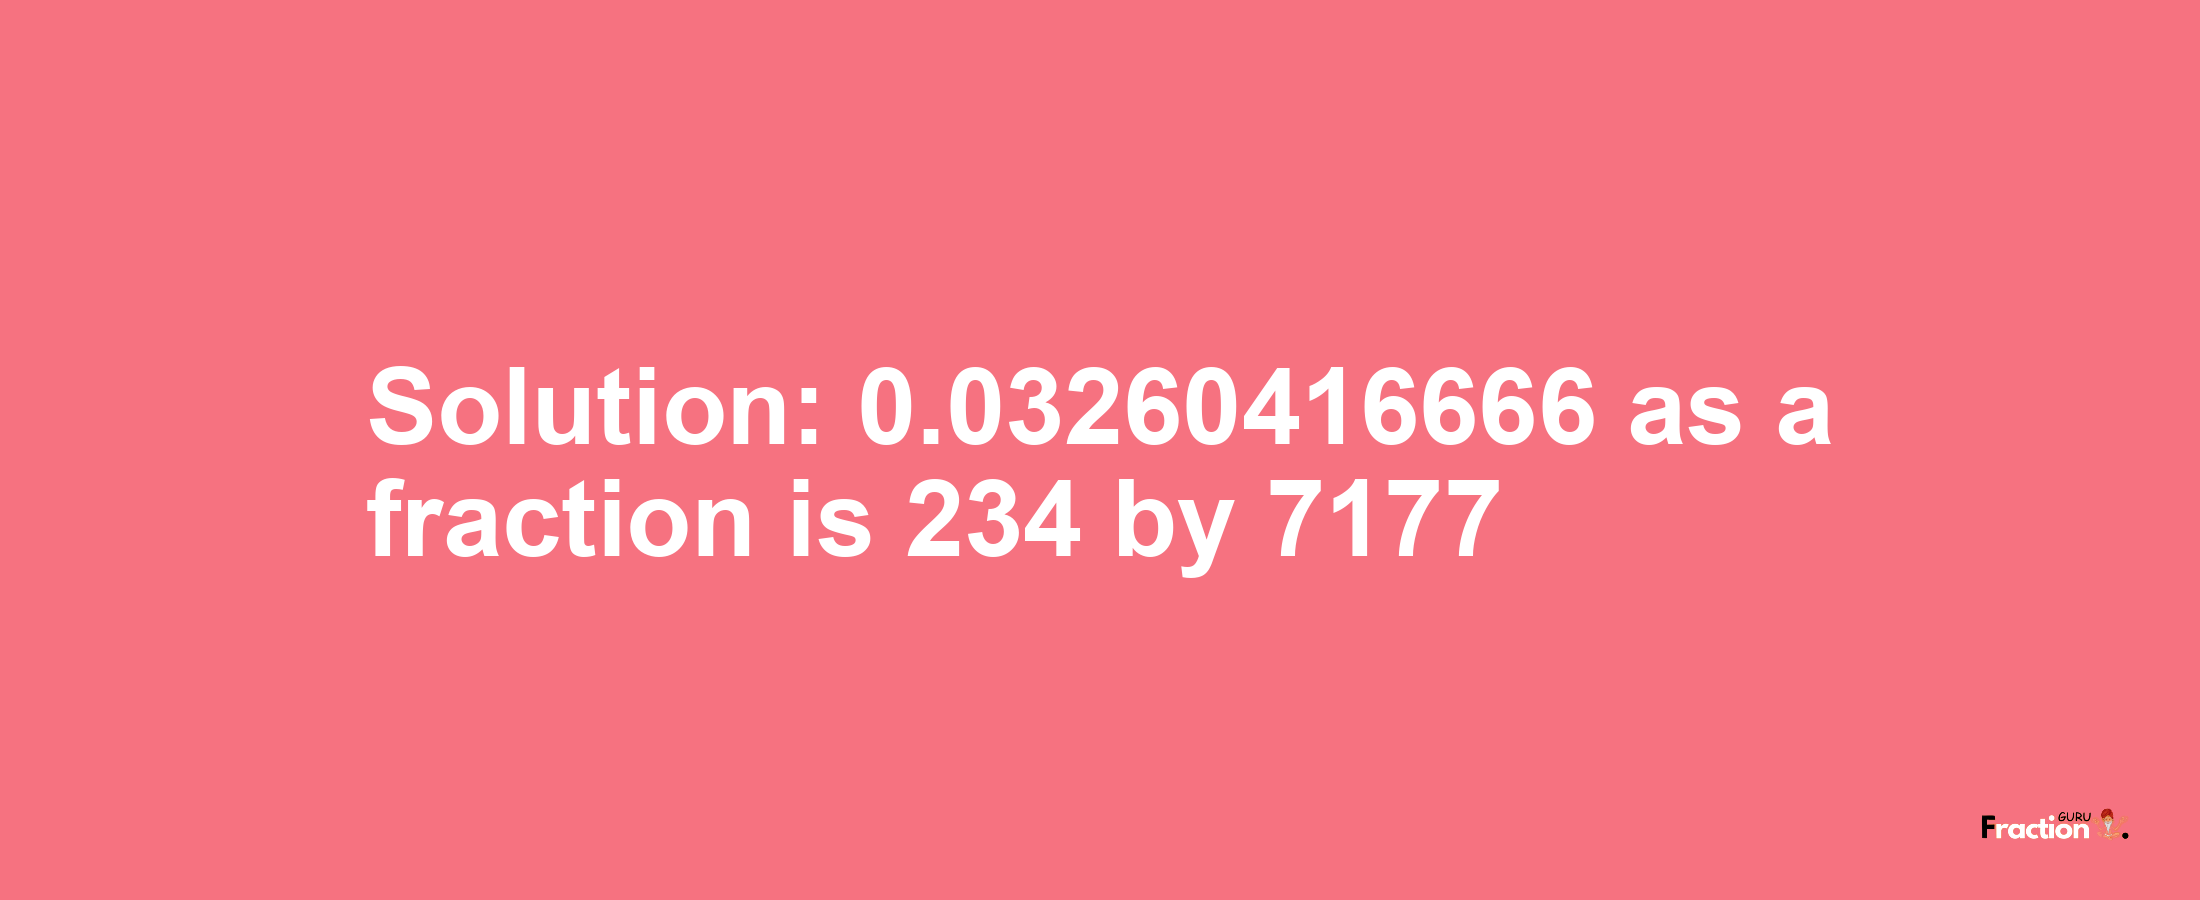 Solution:0.03260416666 as a fraction is 234/7177